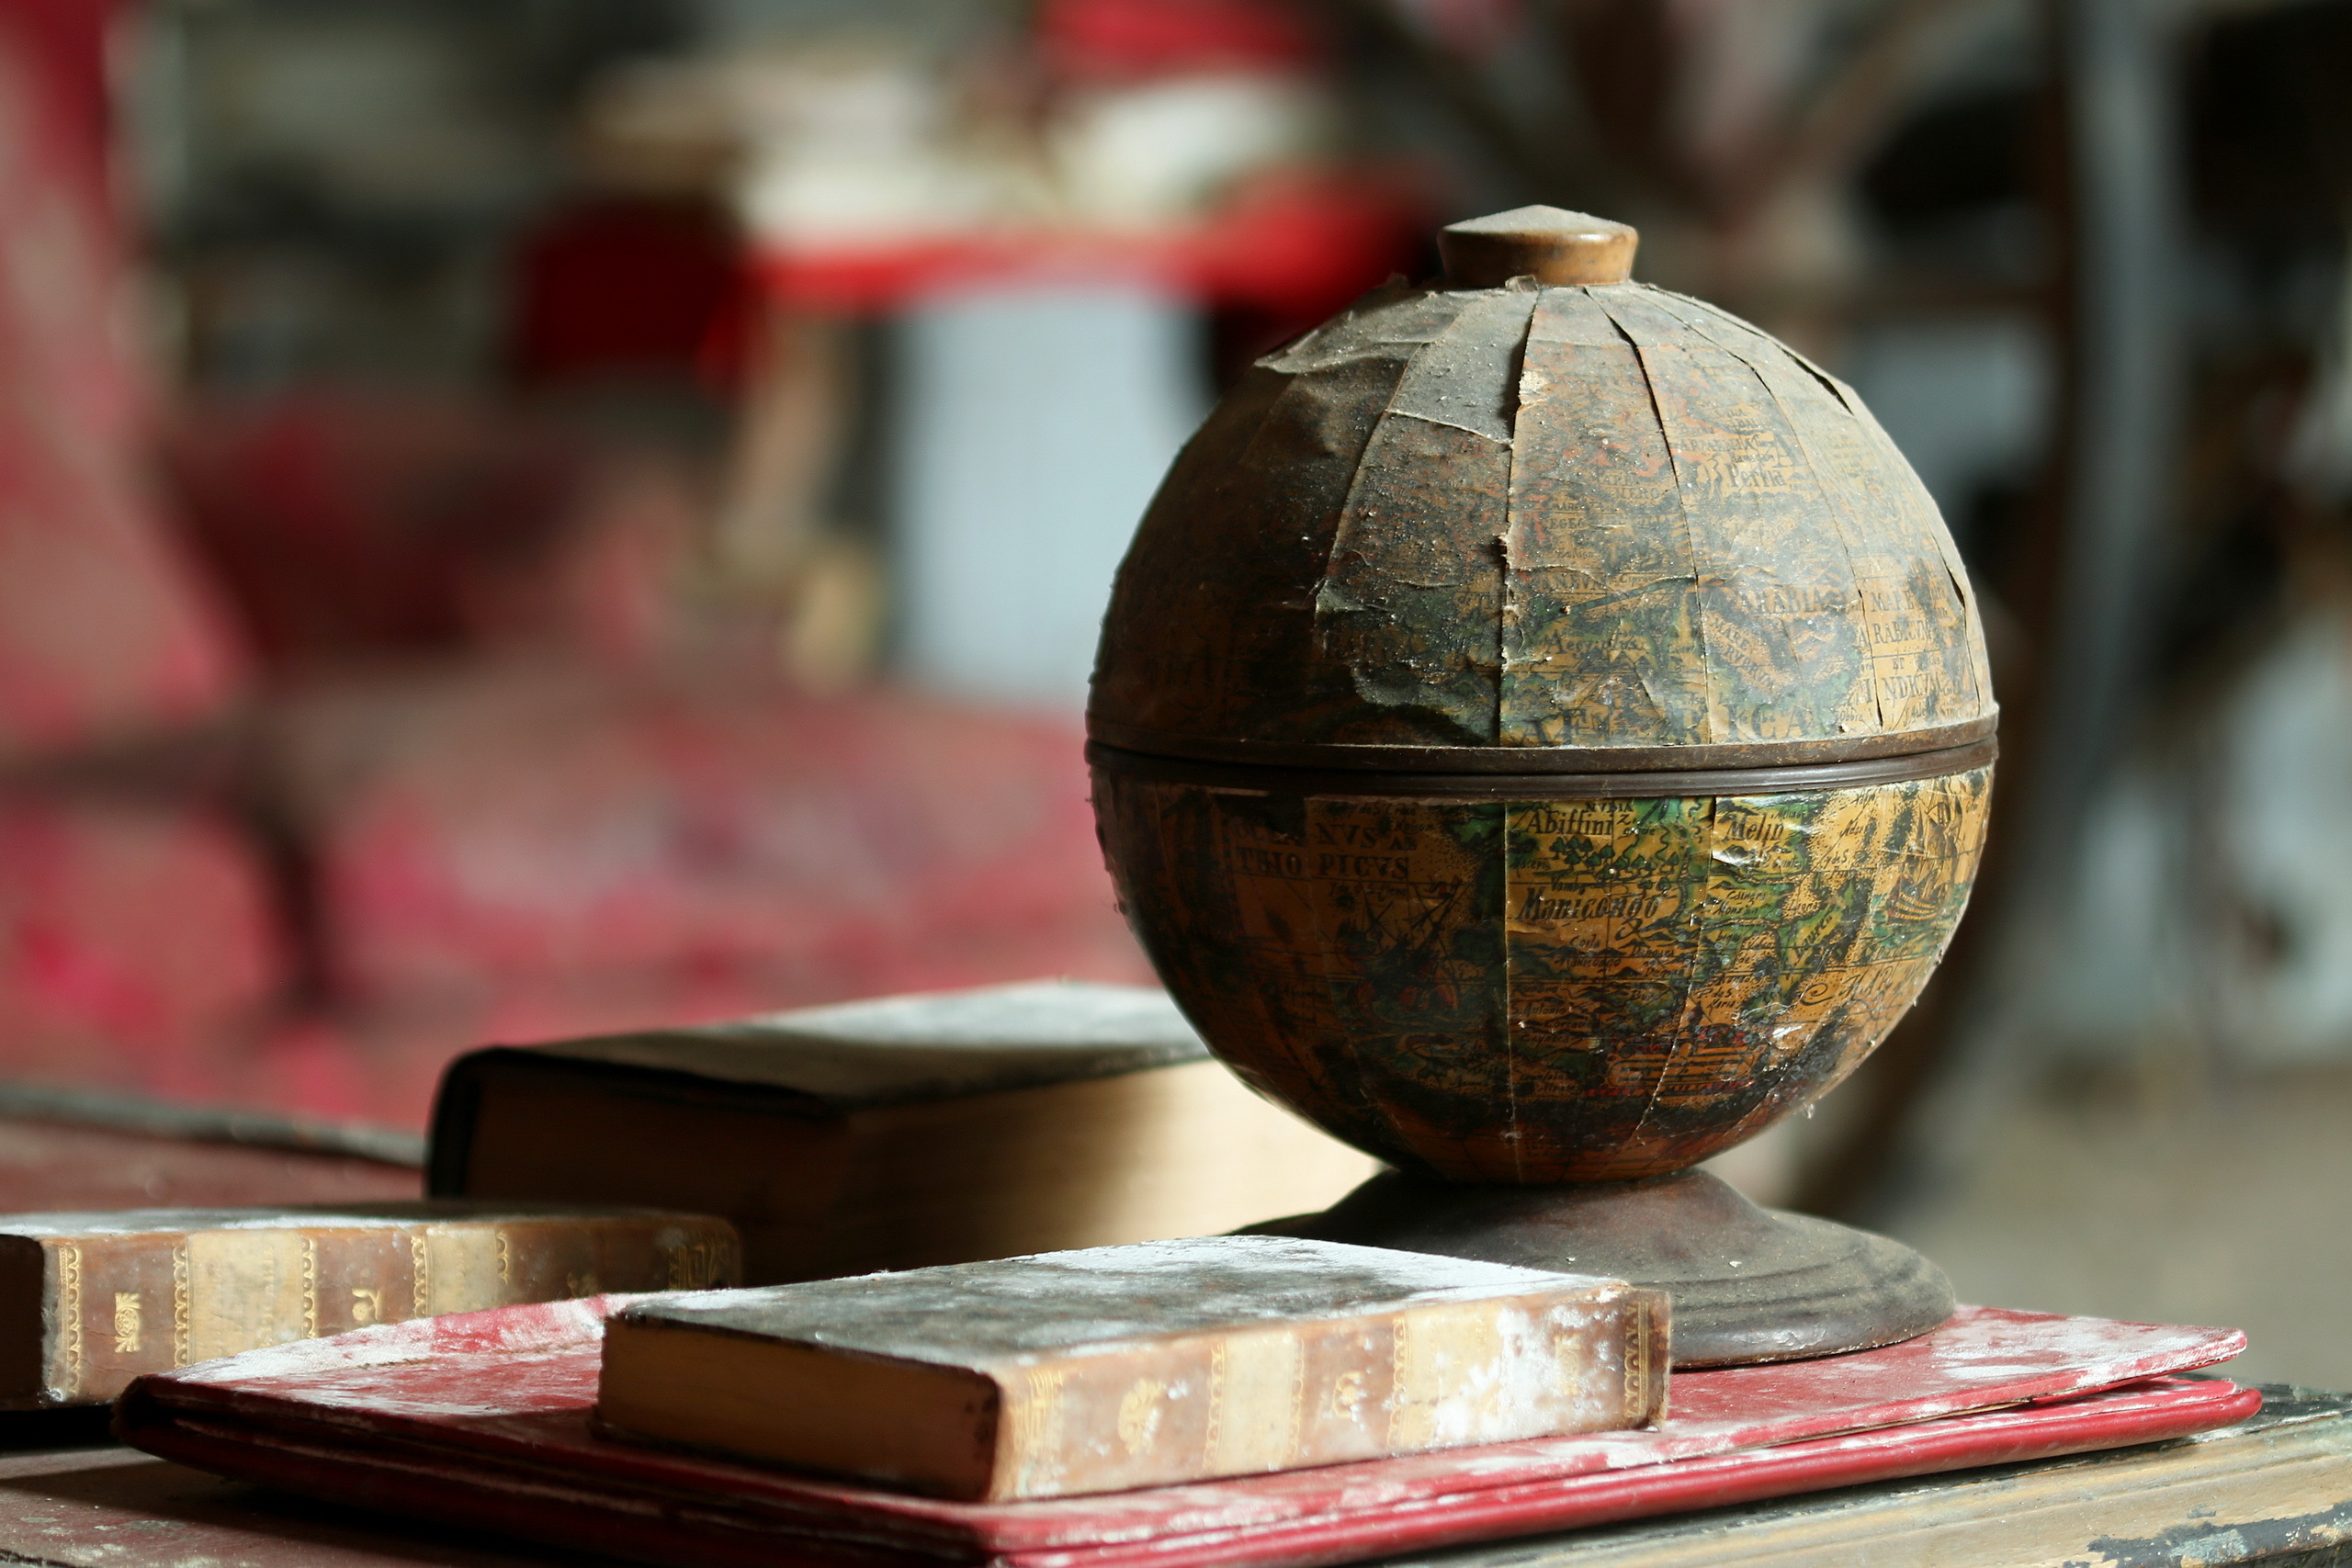 General 2560x1707 old globes indoors blurred depth of field books